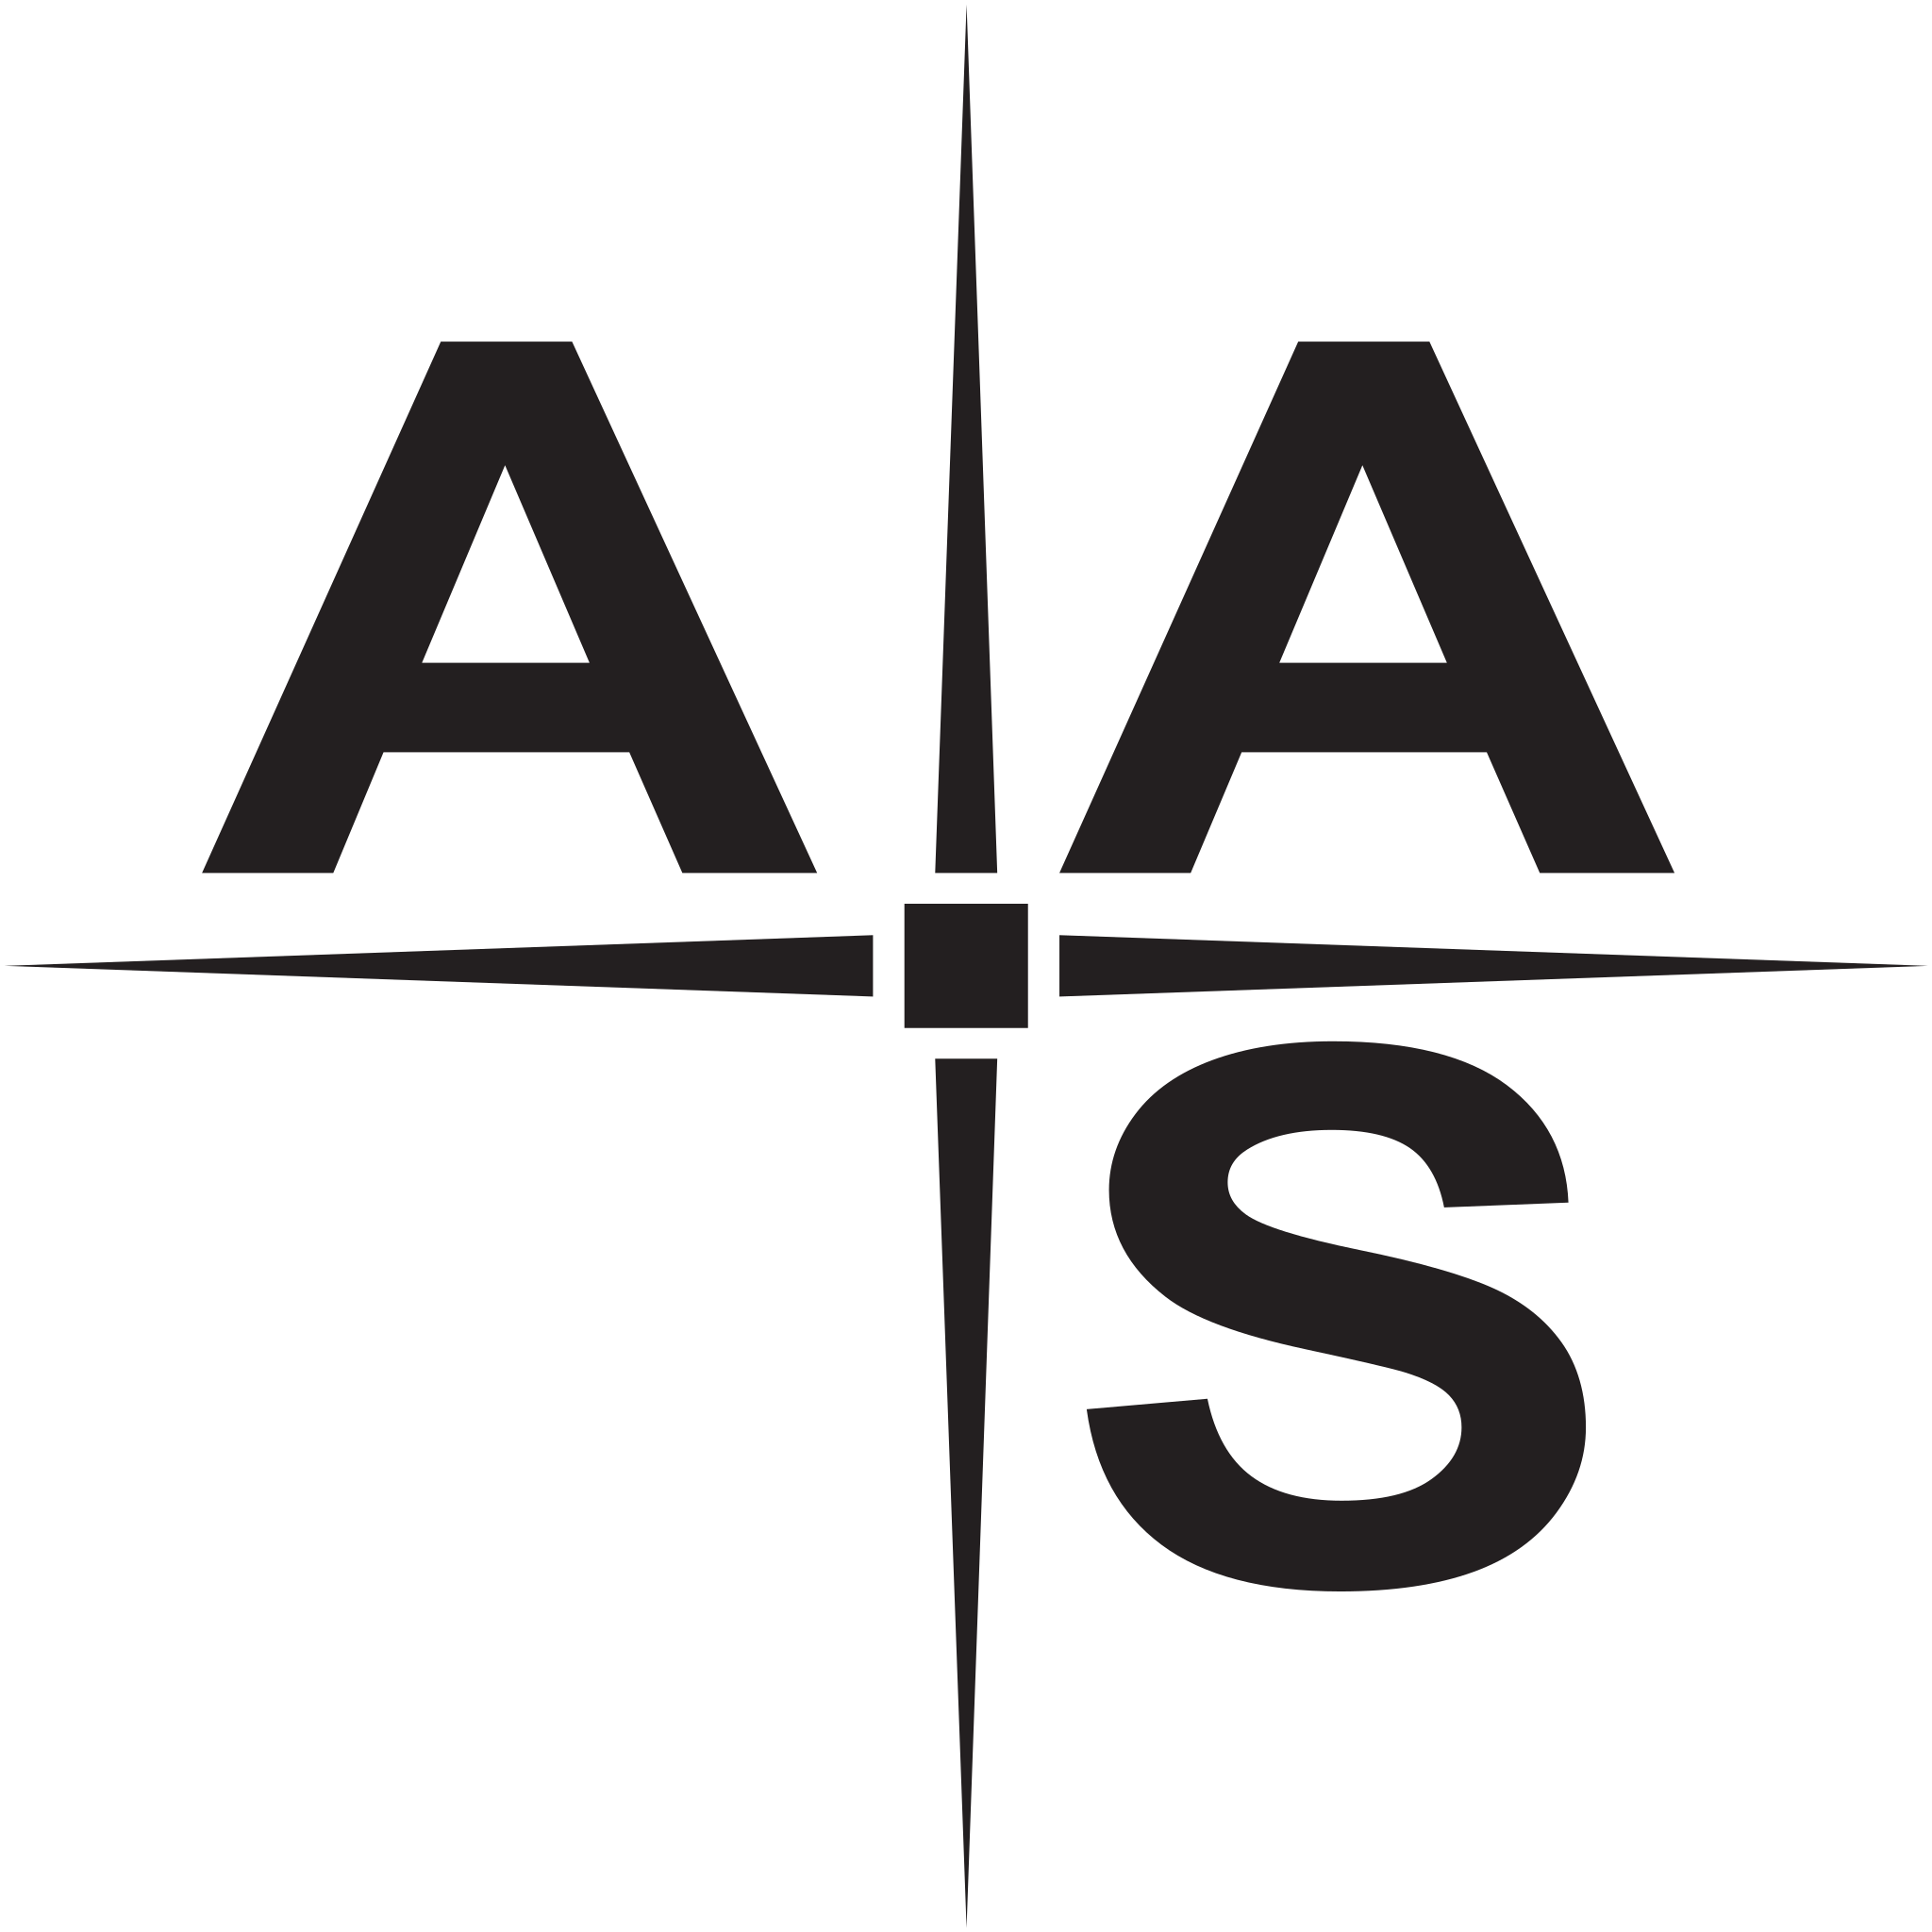 American Astronomical Society logo with A A S around star.